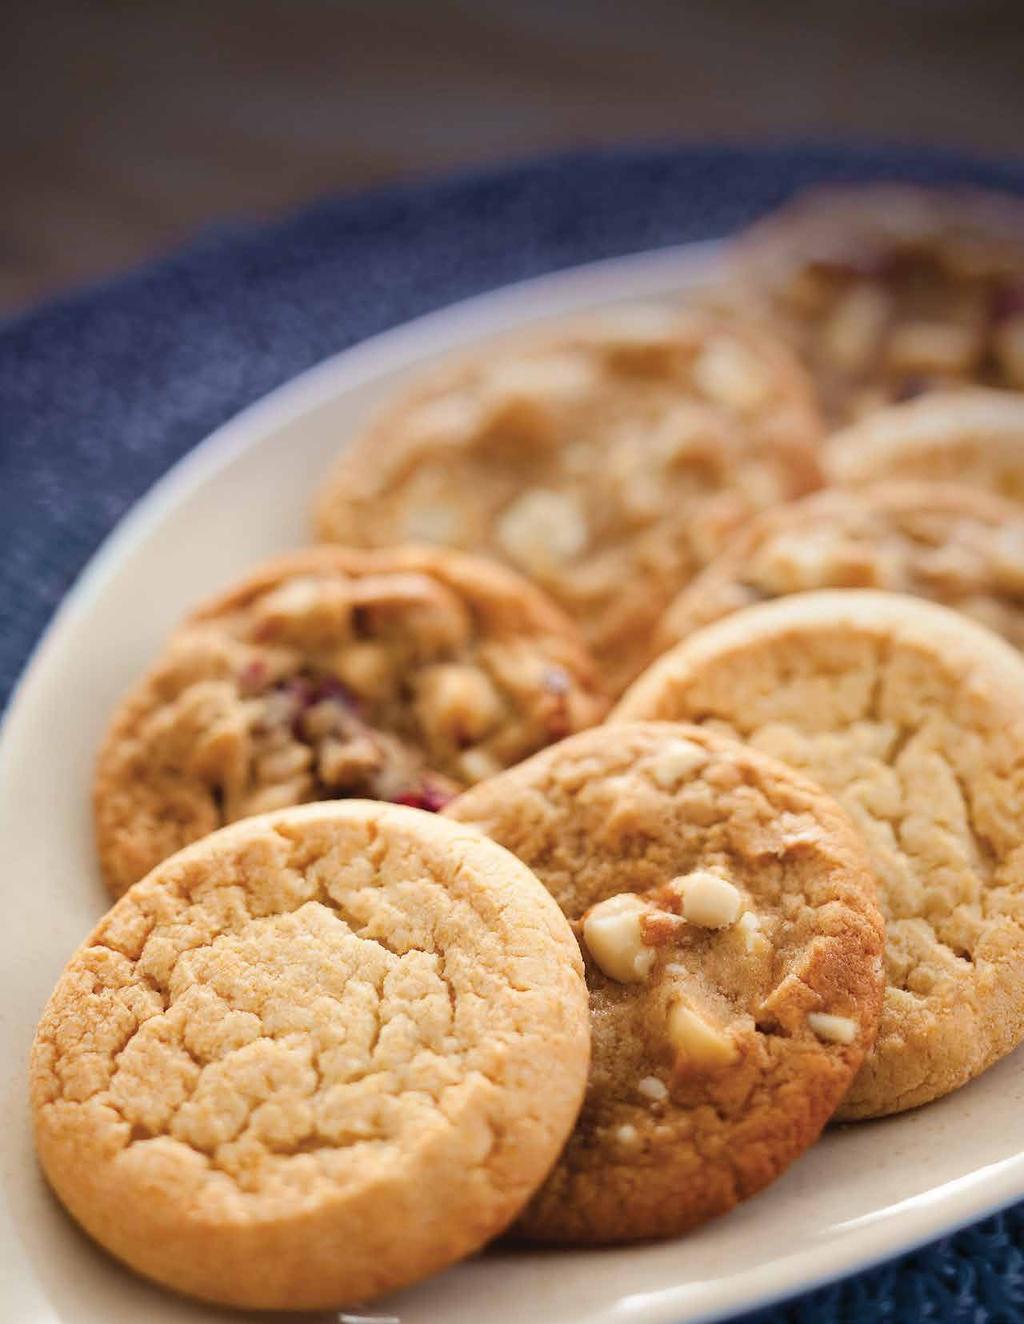 COOKIES Your customers will find our soft and chewy cookies hard to resist. Packed with premium chocolates, nuts, tasty fruits and candies, these cookies are sure to satisfy any craving.